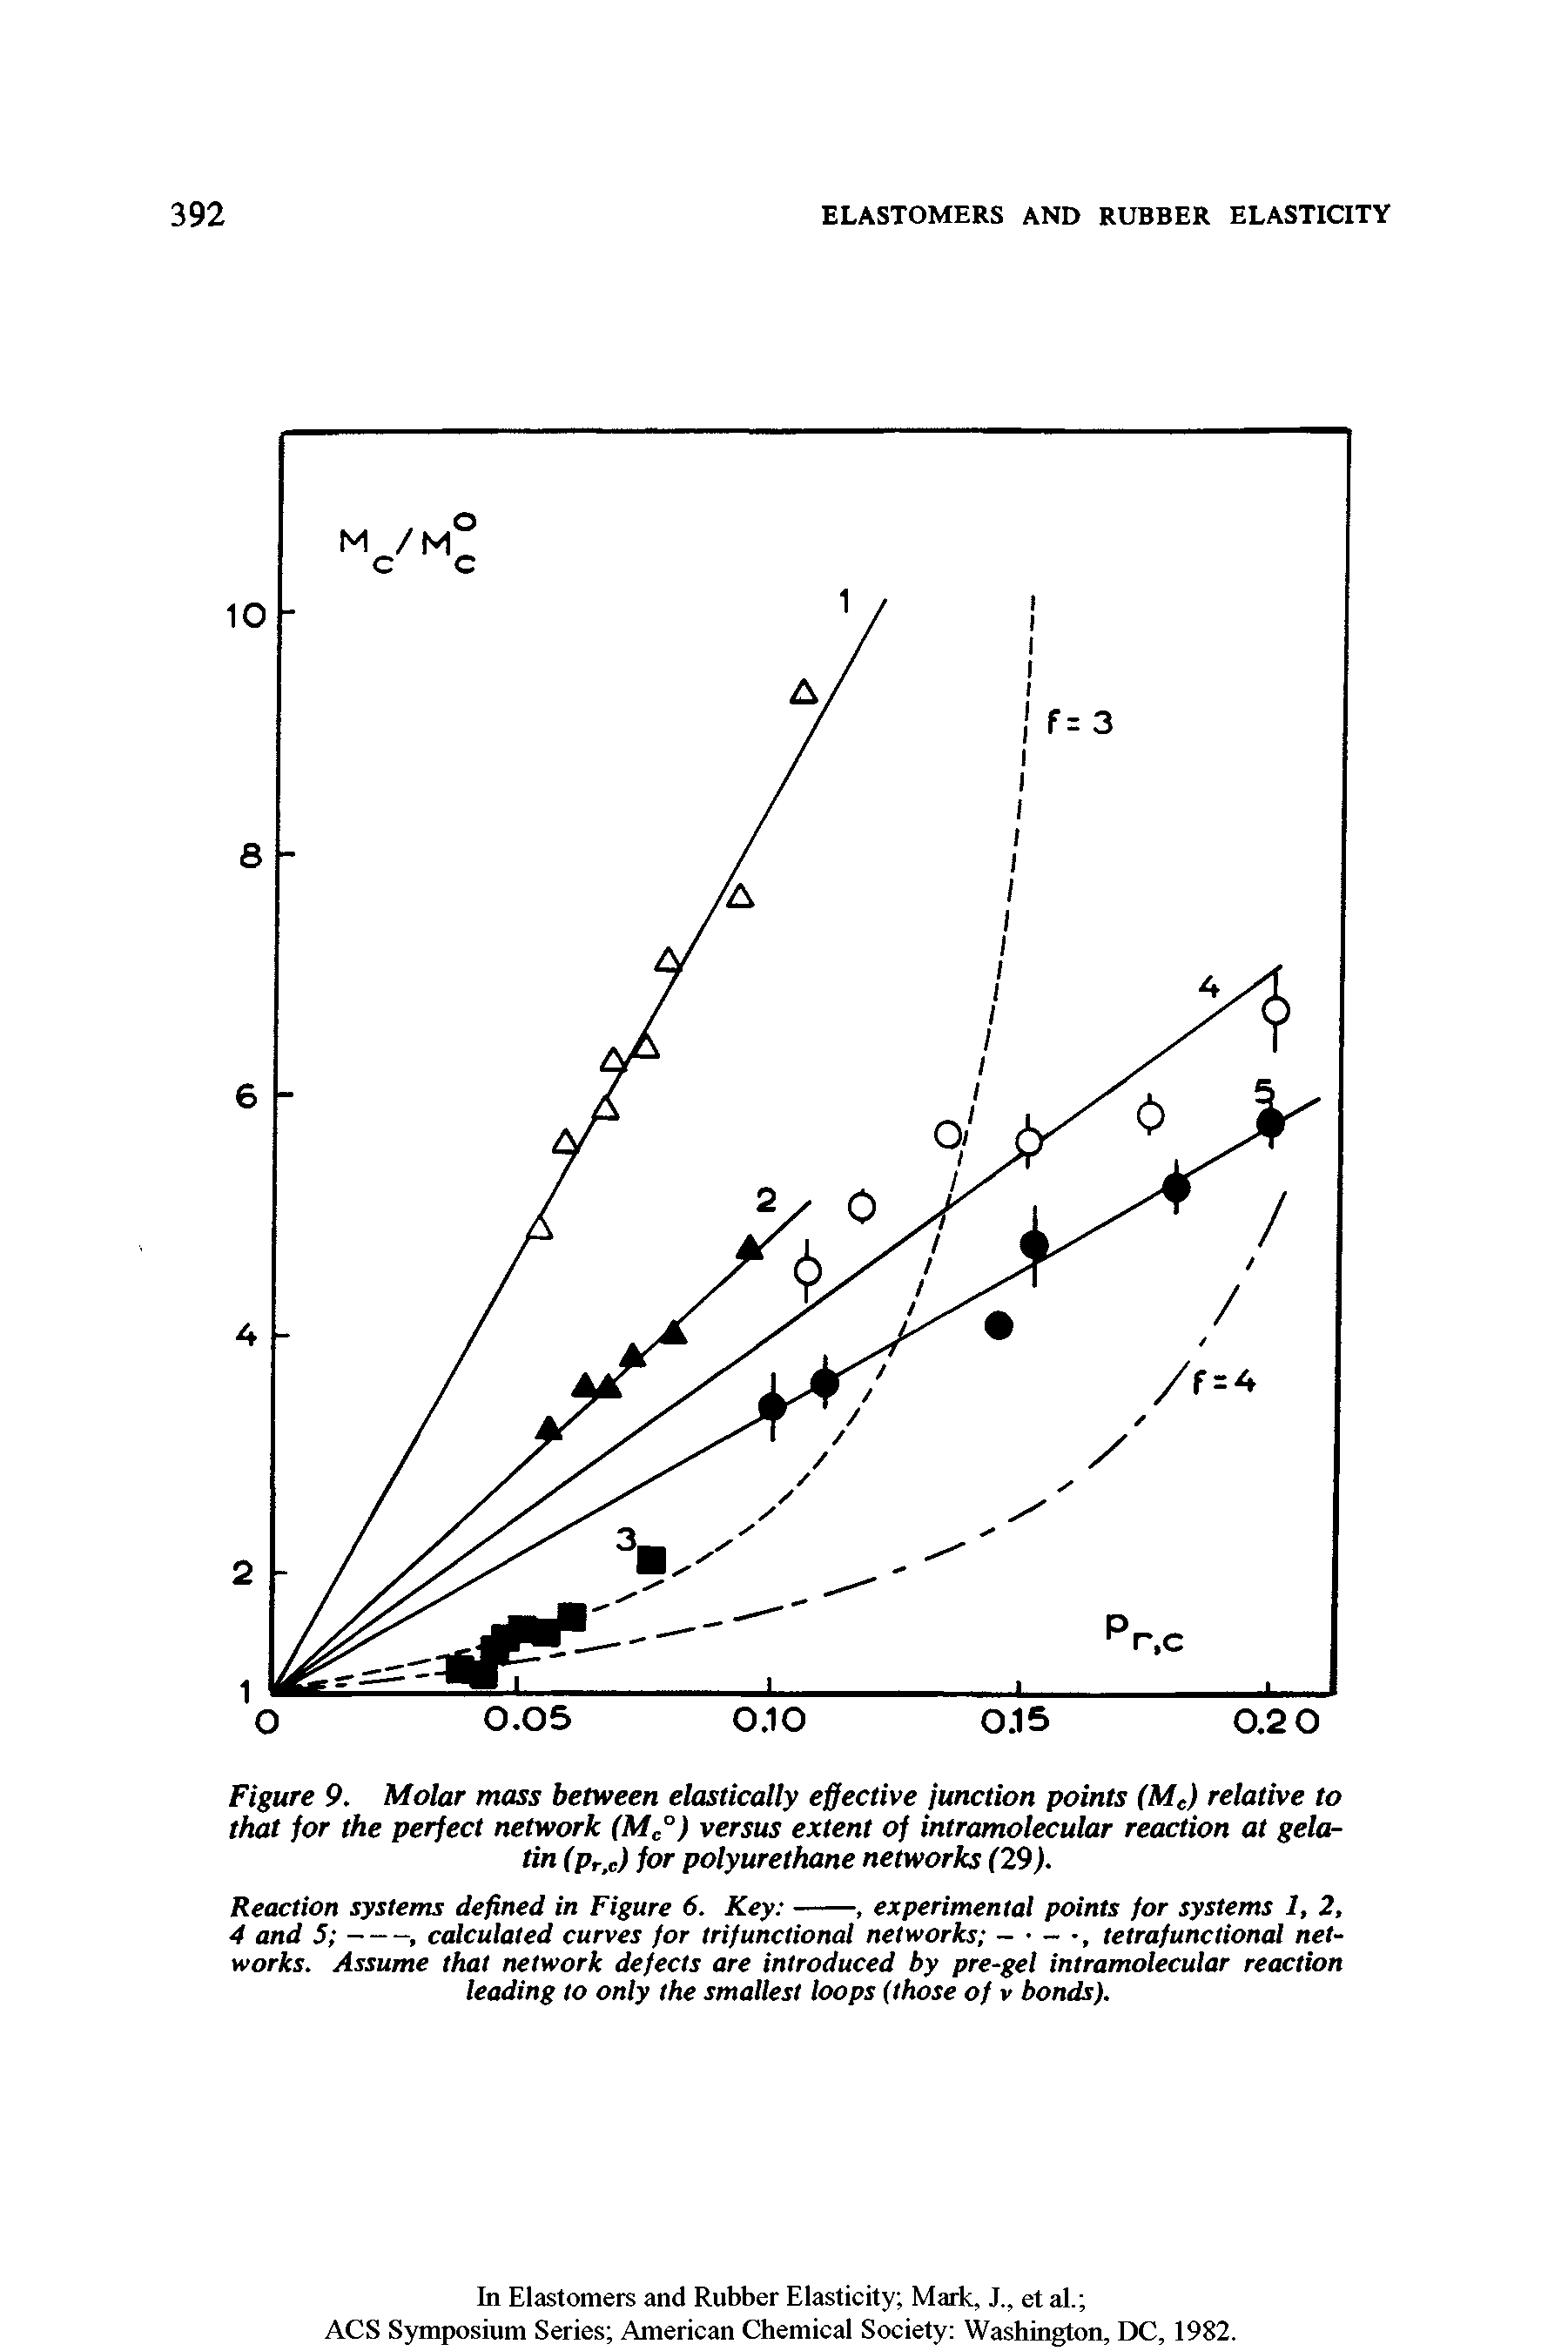 Figure 9. Molar mass between elastically effective junction points (Mc) relative to that for the perfect network (Mc°) versus extent of intramolecular reaction at gelatin (pr,c) for polyurethane networks (29).